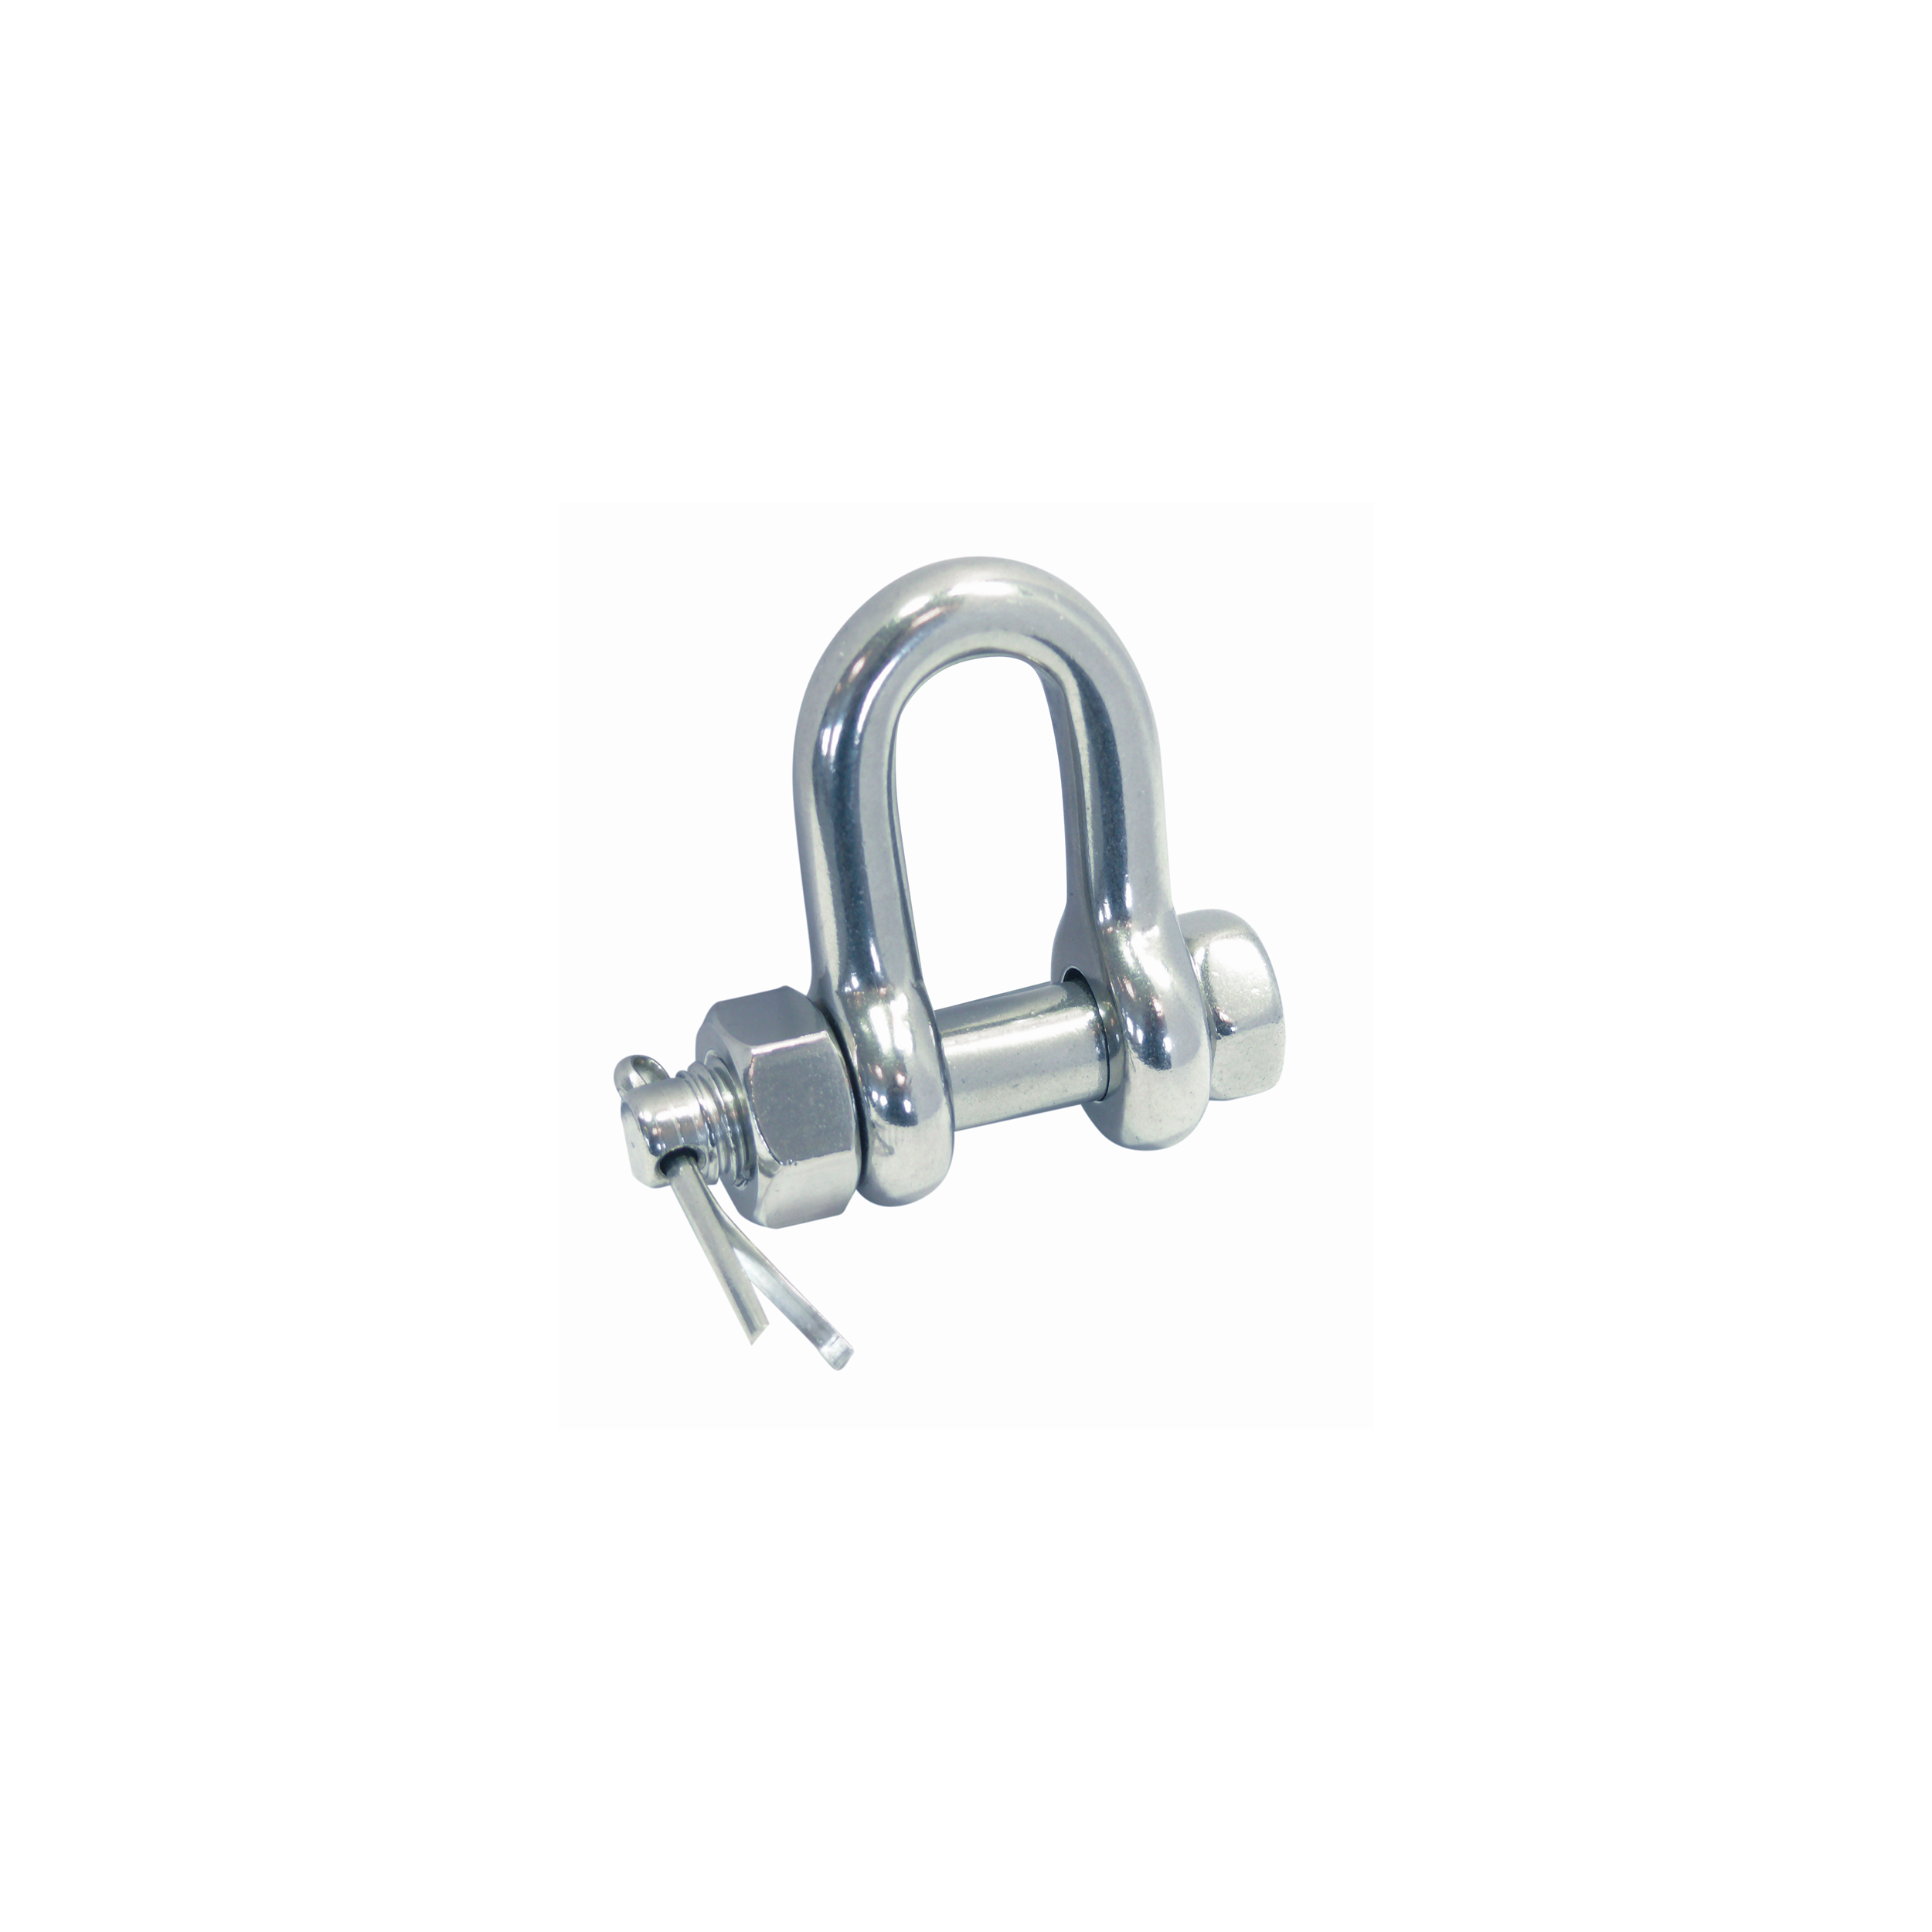 D-shackle with secure bolt A4  bolt 16mm, bow 12mm